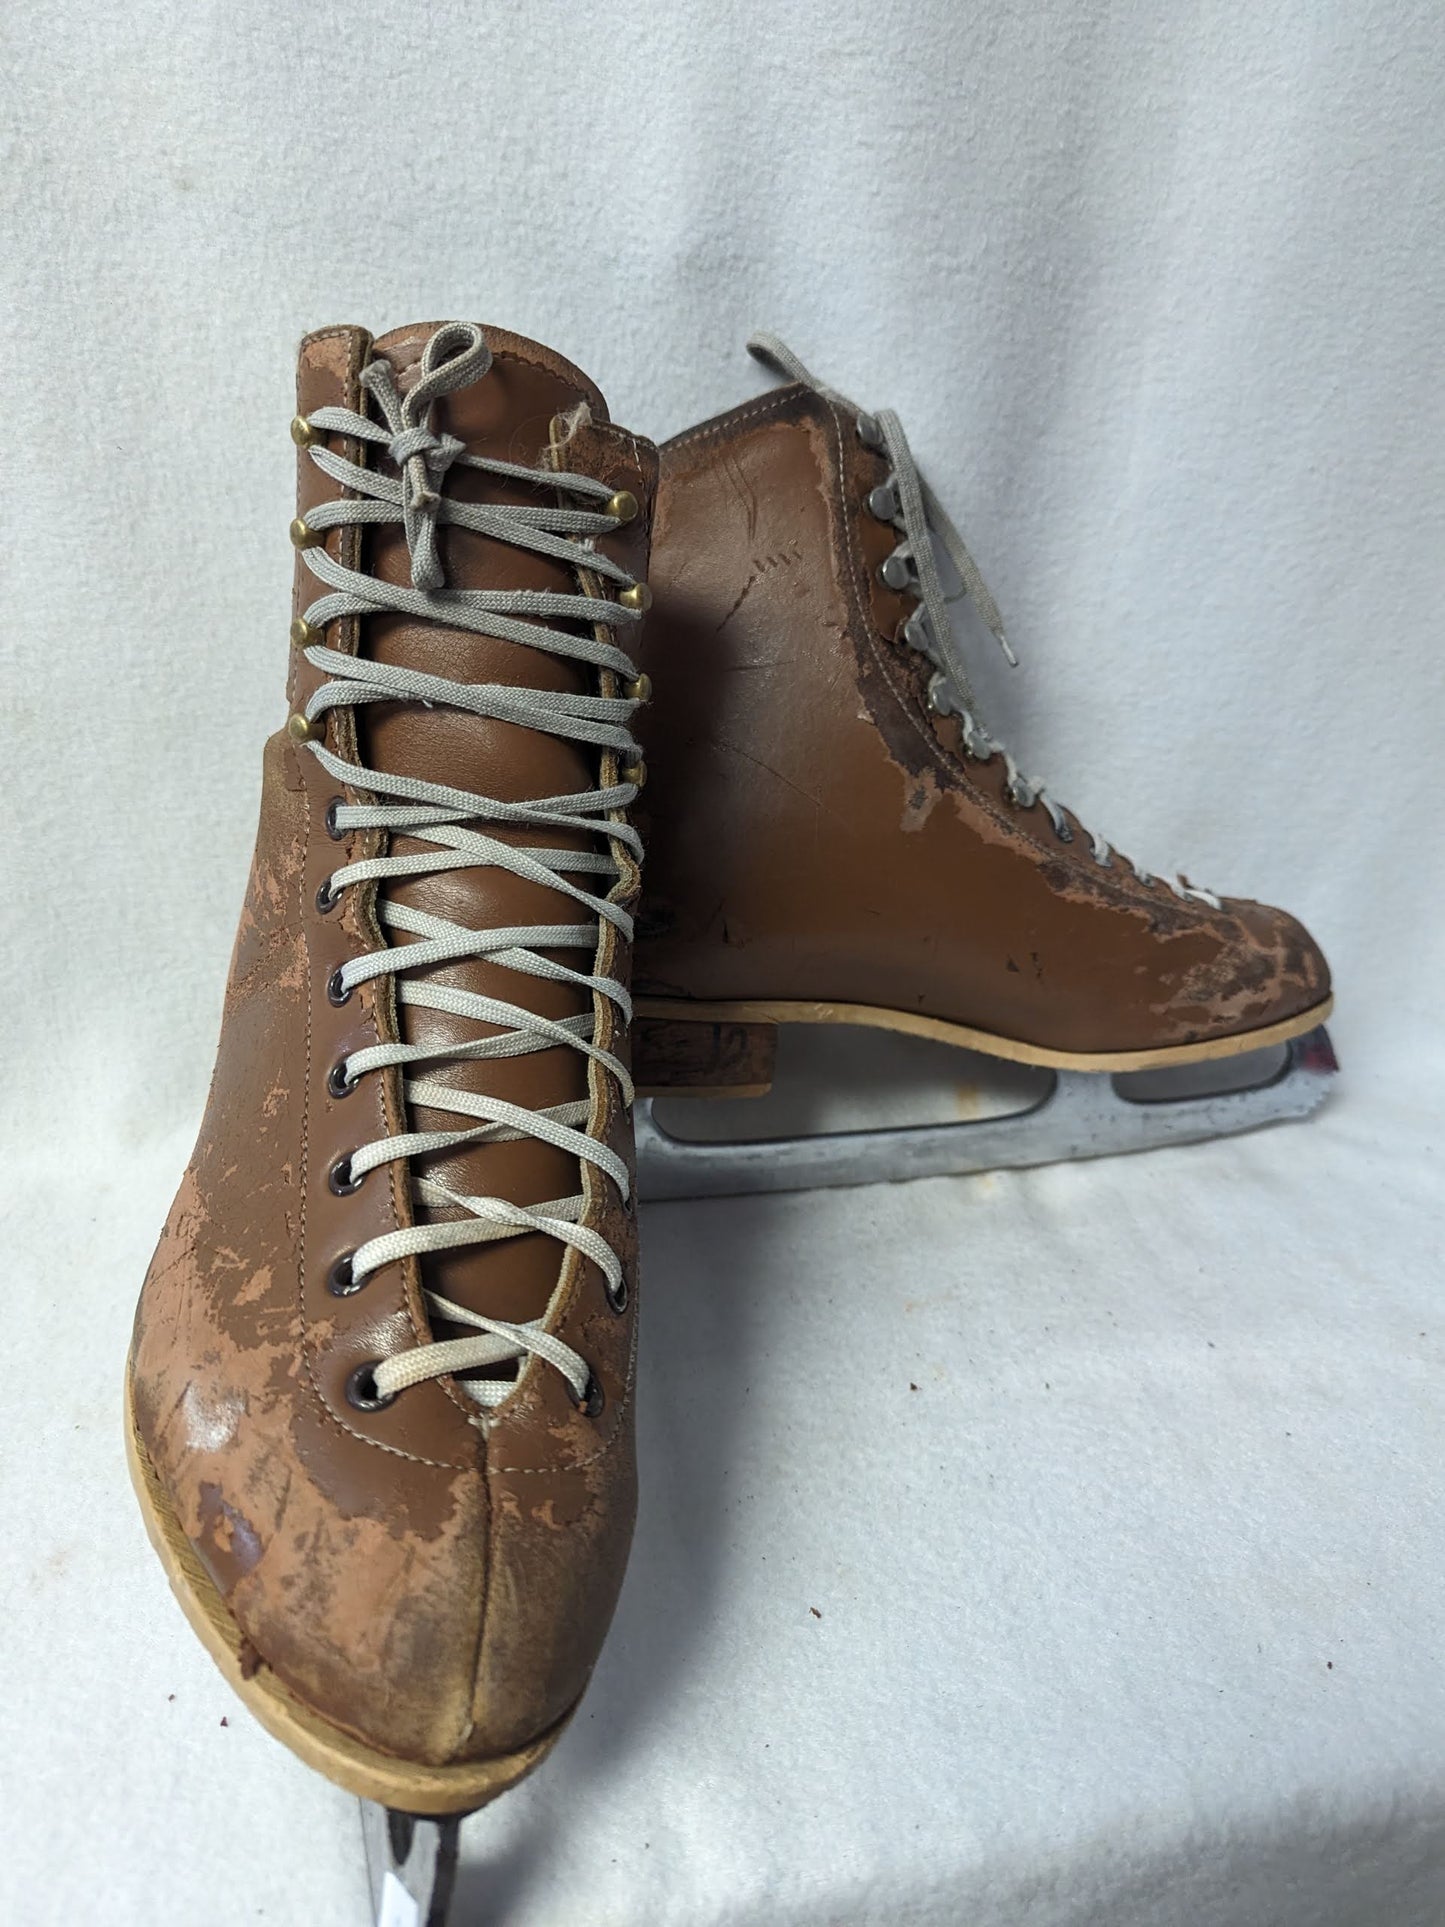 Rink Master Ice Skates Size 8 Color Brown Condition Used